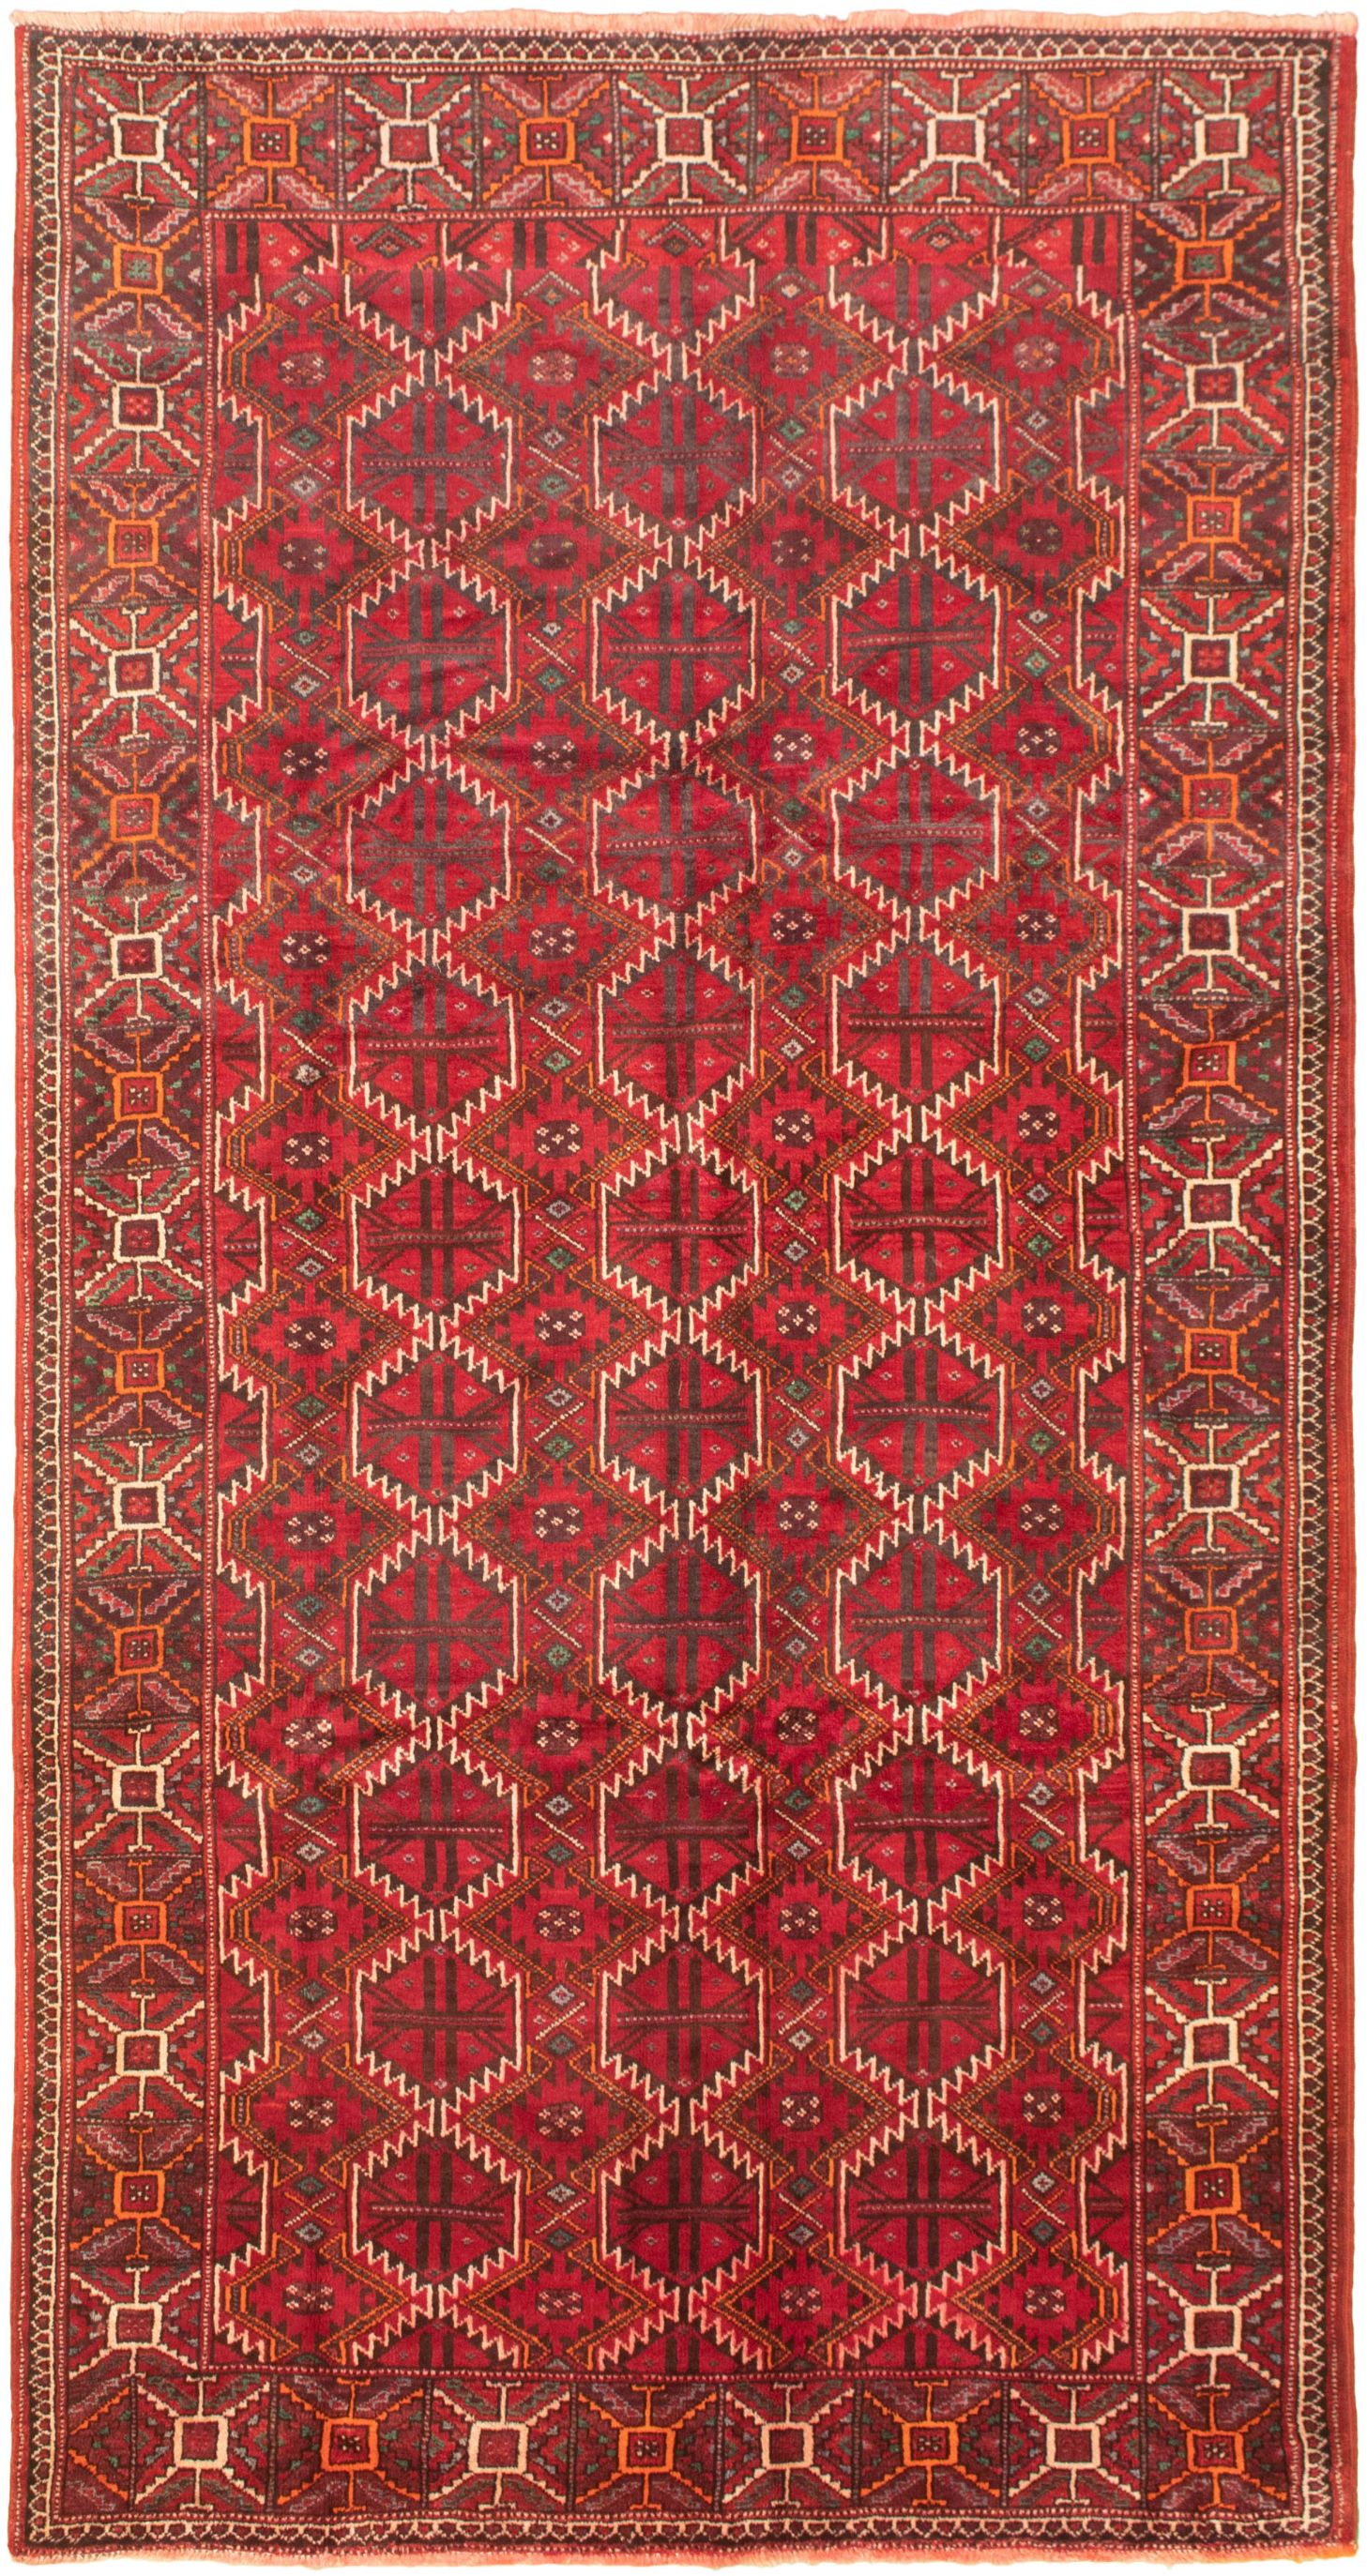 Hand-knotted Authentic Turkish Red Wool Rug 5'3" x 10'1"  Size: 5'3" x 10'1"  